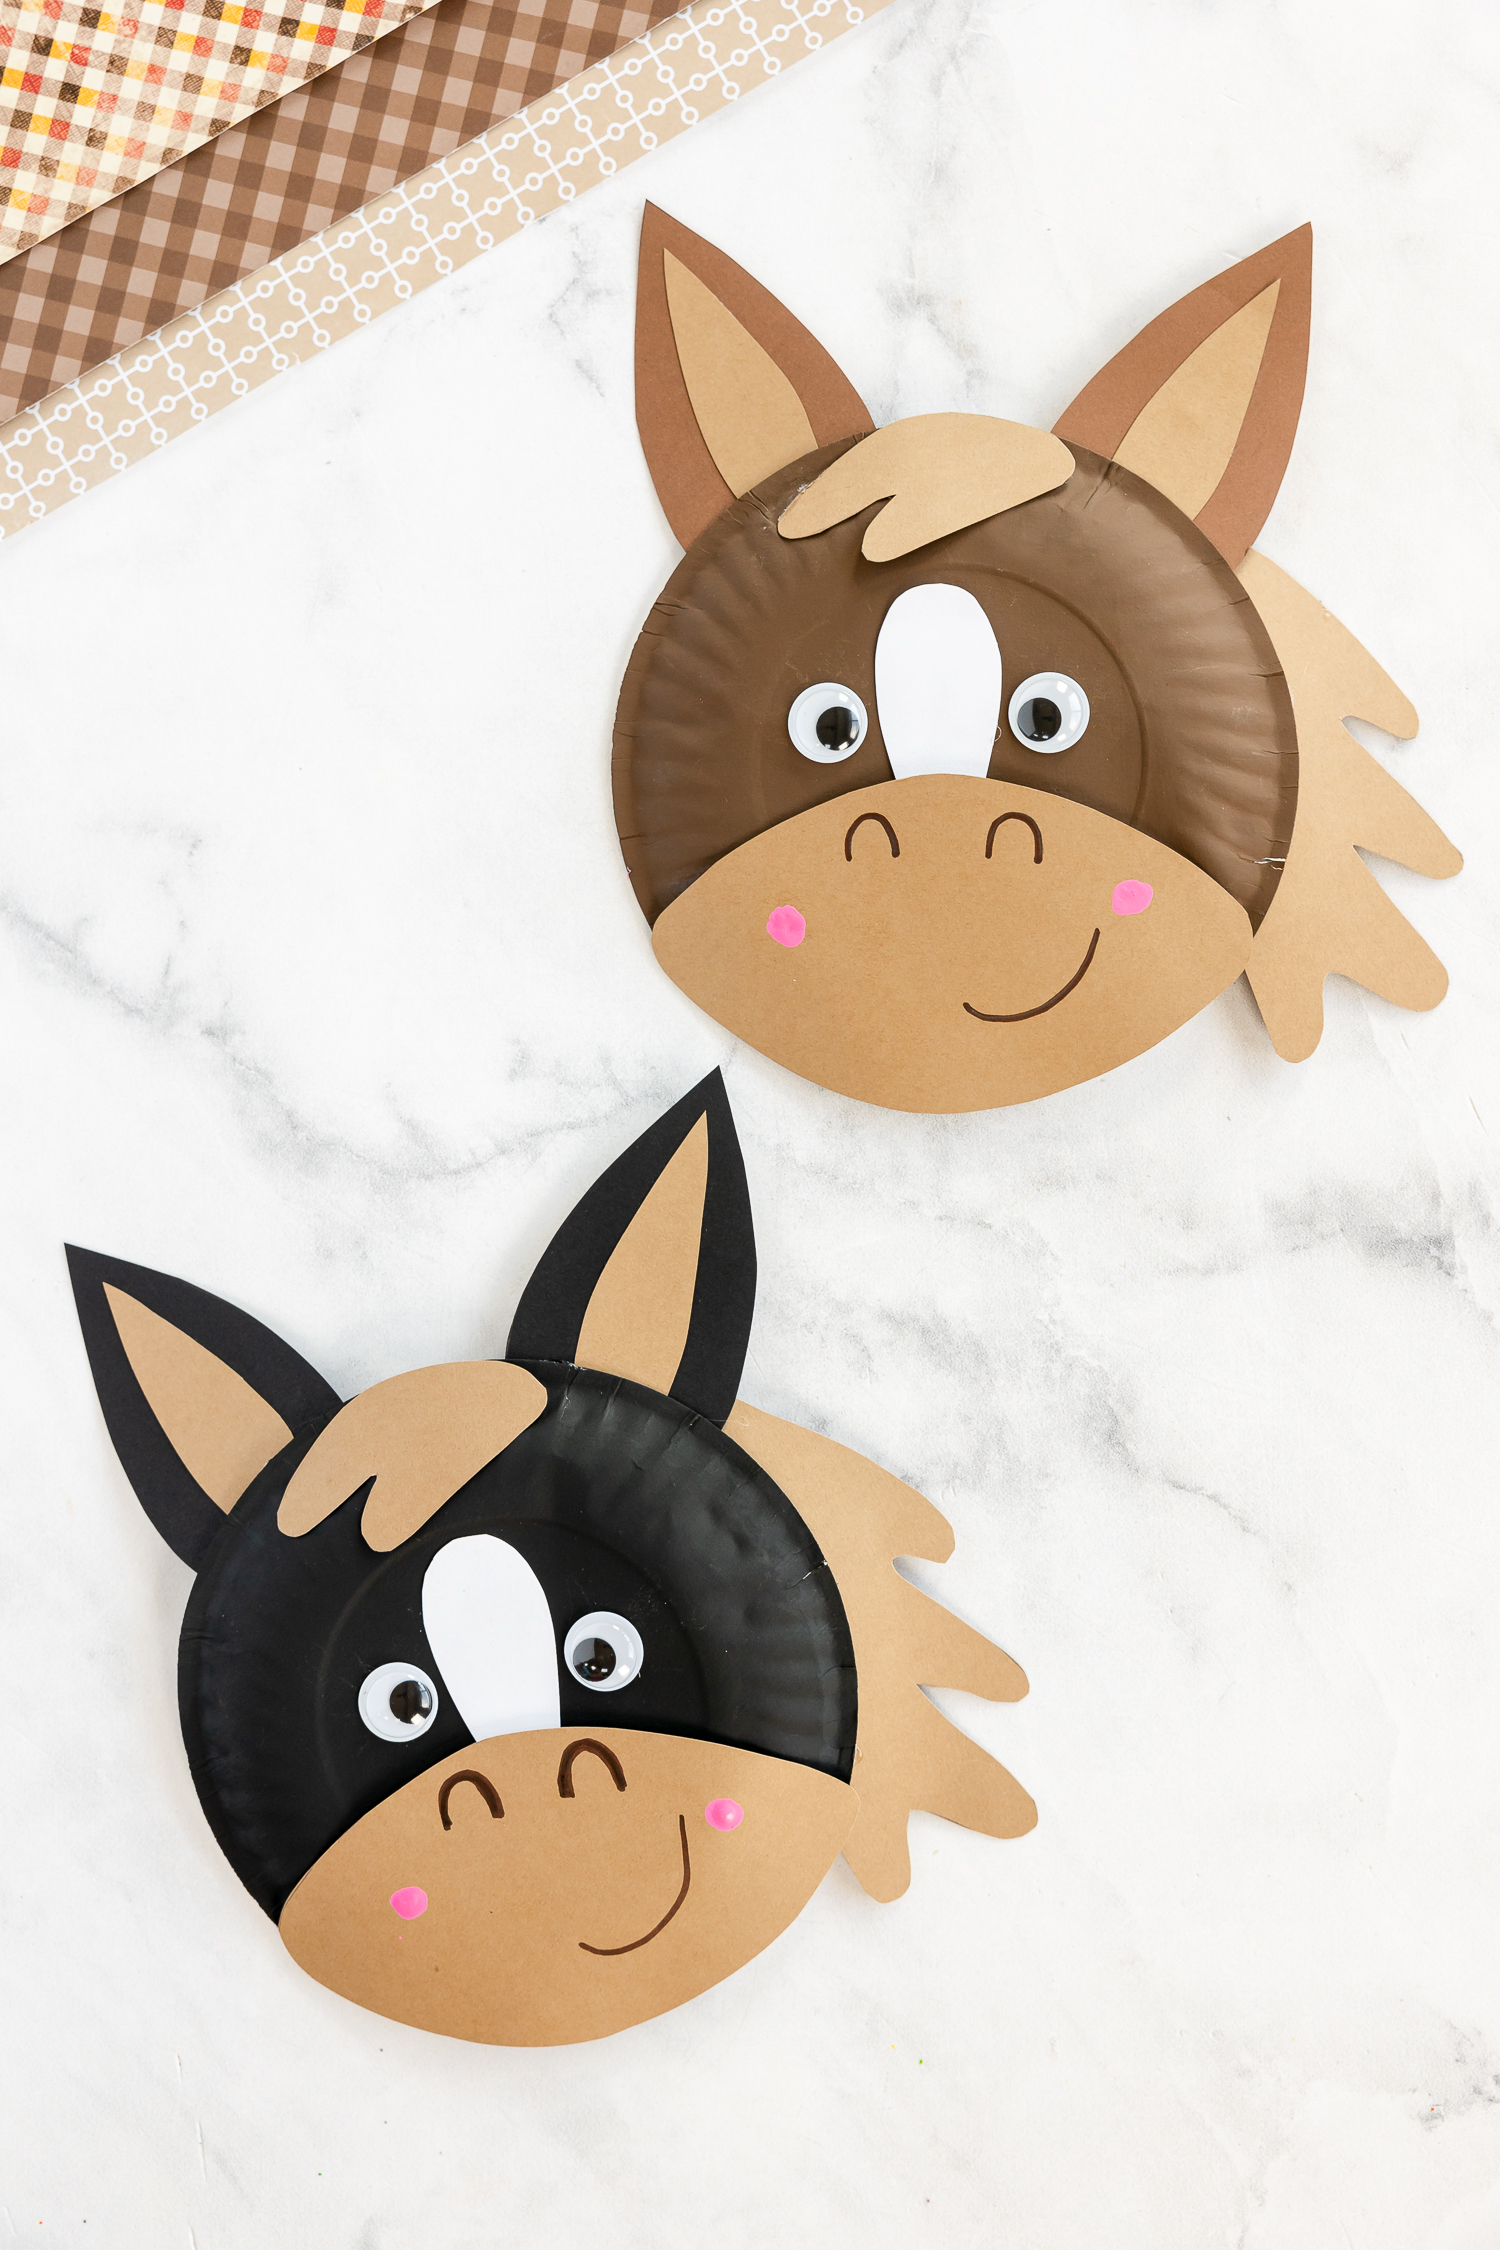 DIY Paper Plate Horse Craft For Kids